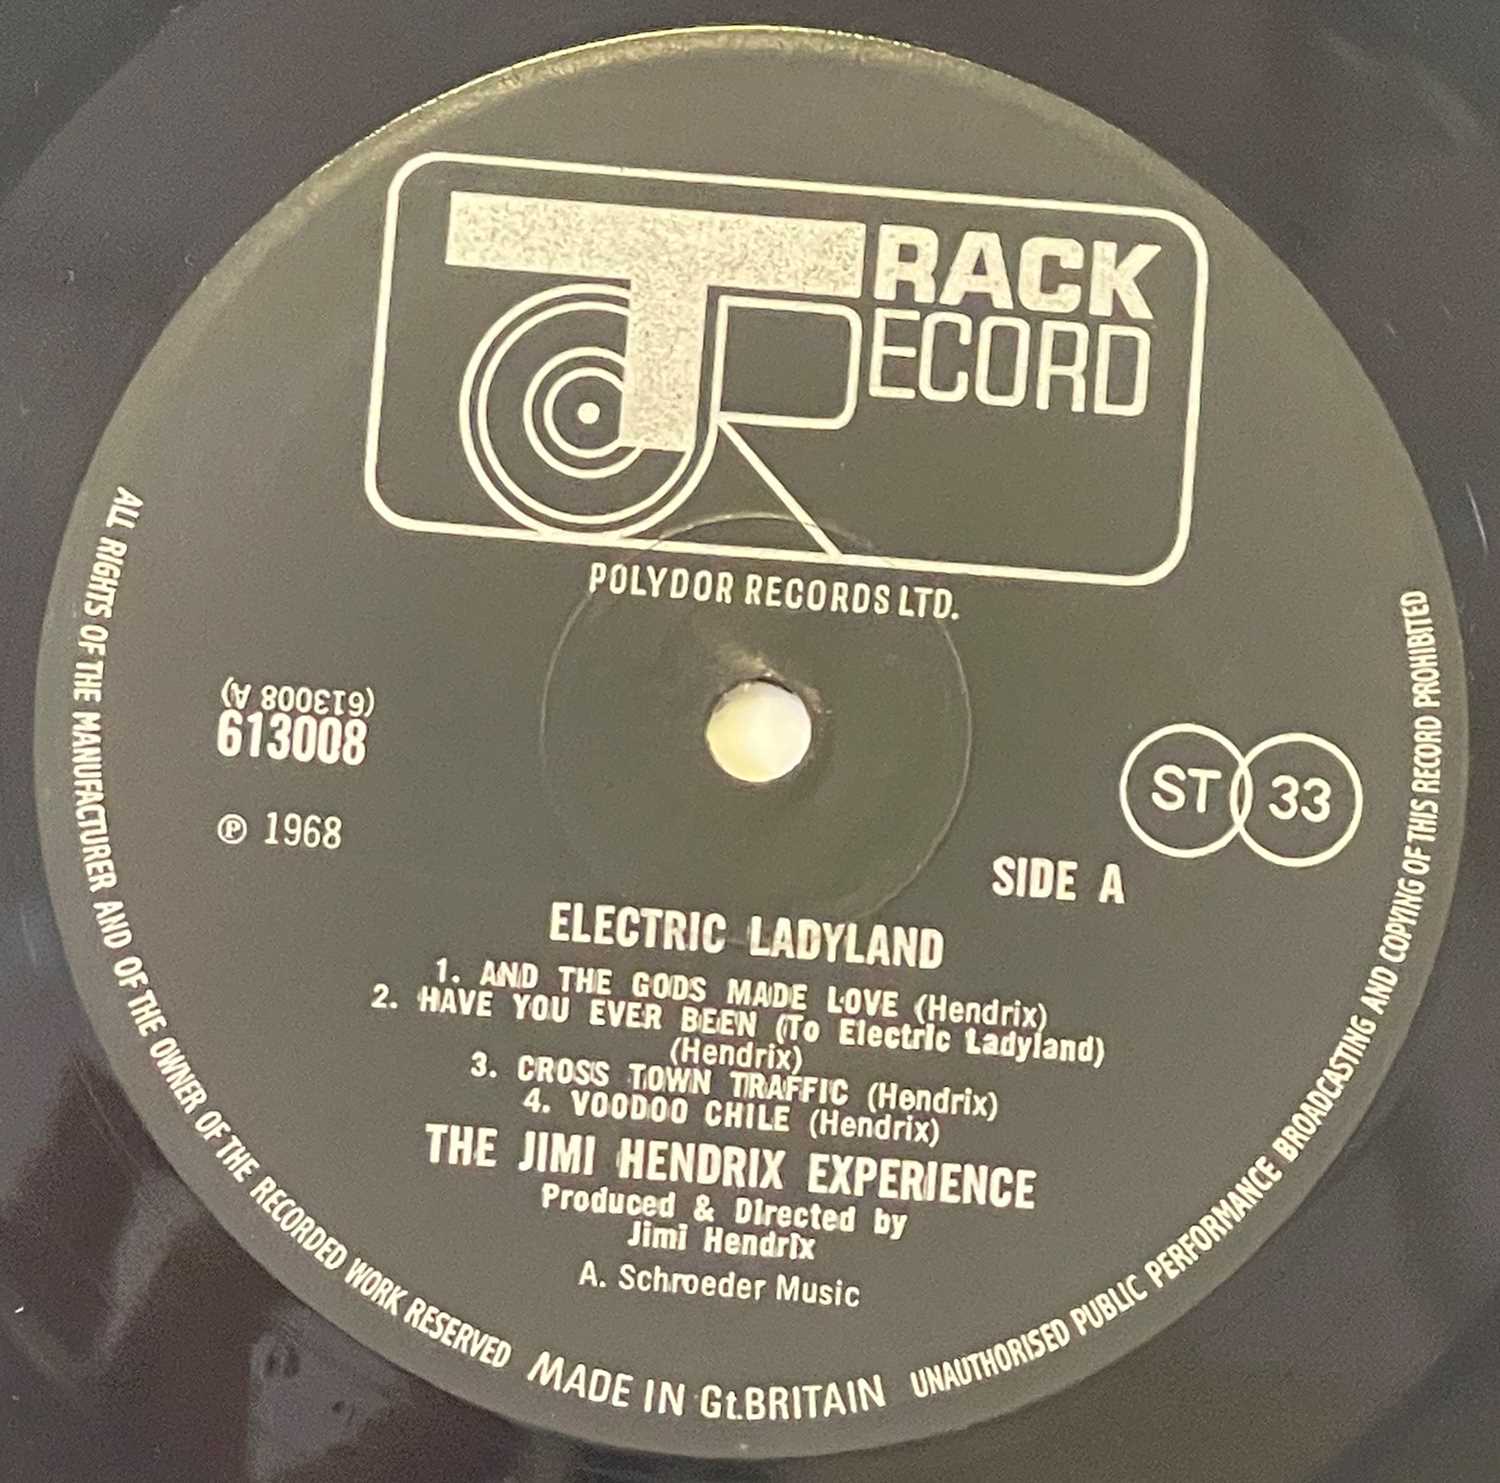 THE JIMI HENDRIX EXPERIENCE - ELECTRIC LADYLAND LP (ORIGINAL UK 'BLUE TEXT' - TRACK 613008/9) - Image 4 of 4